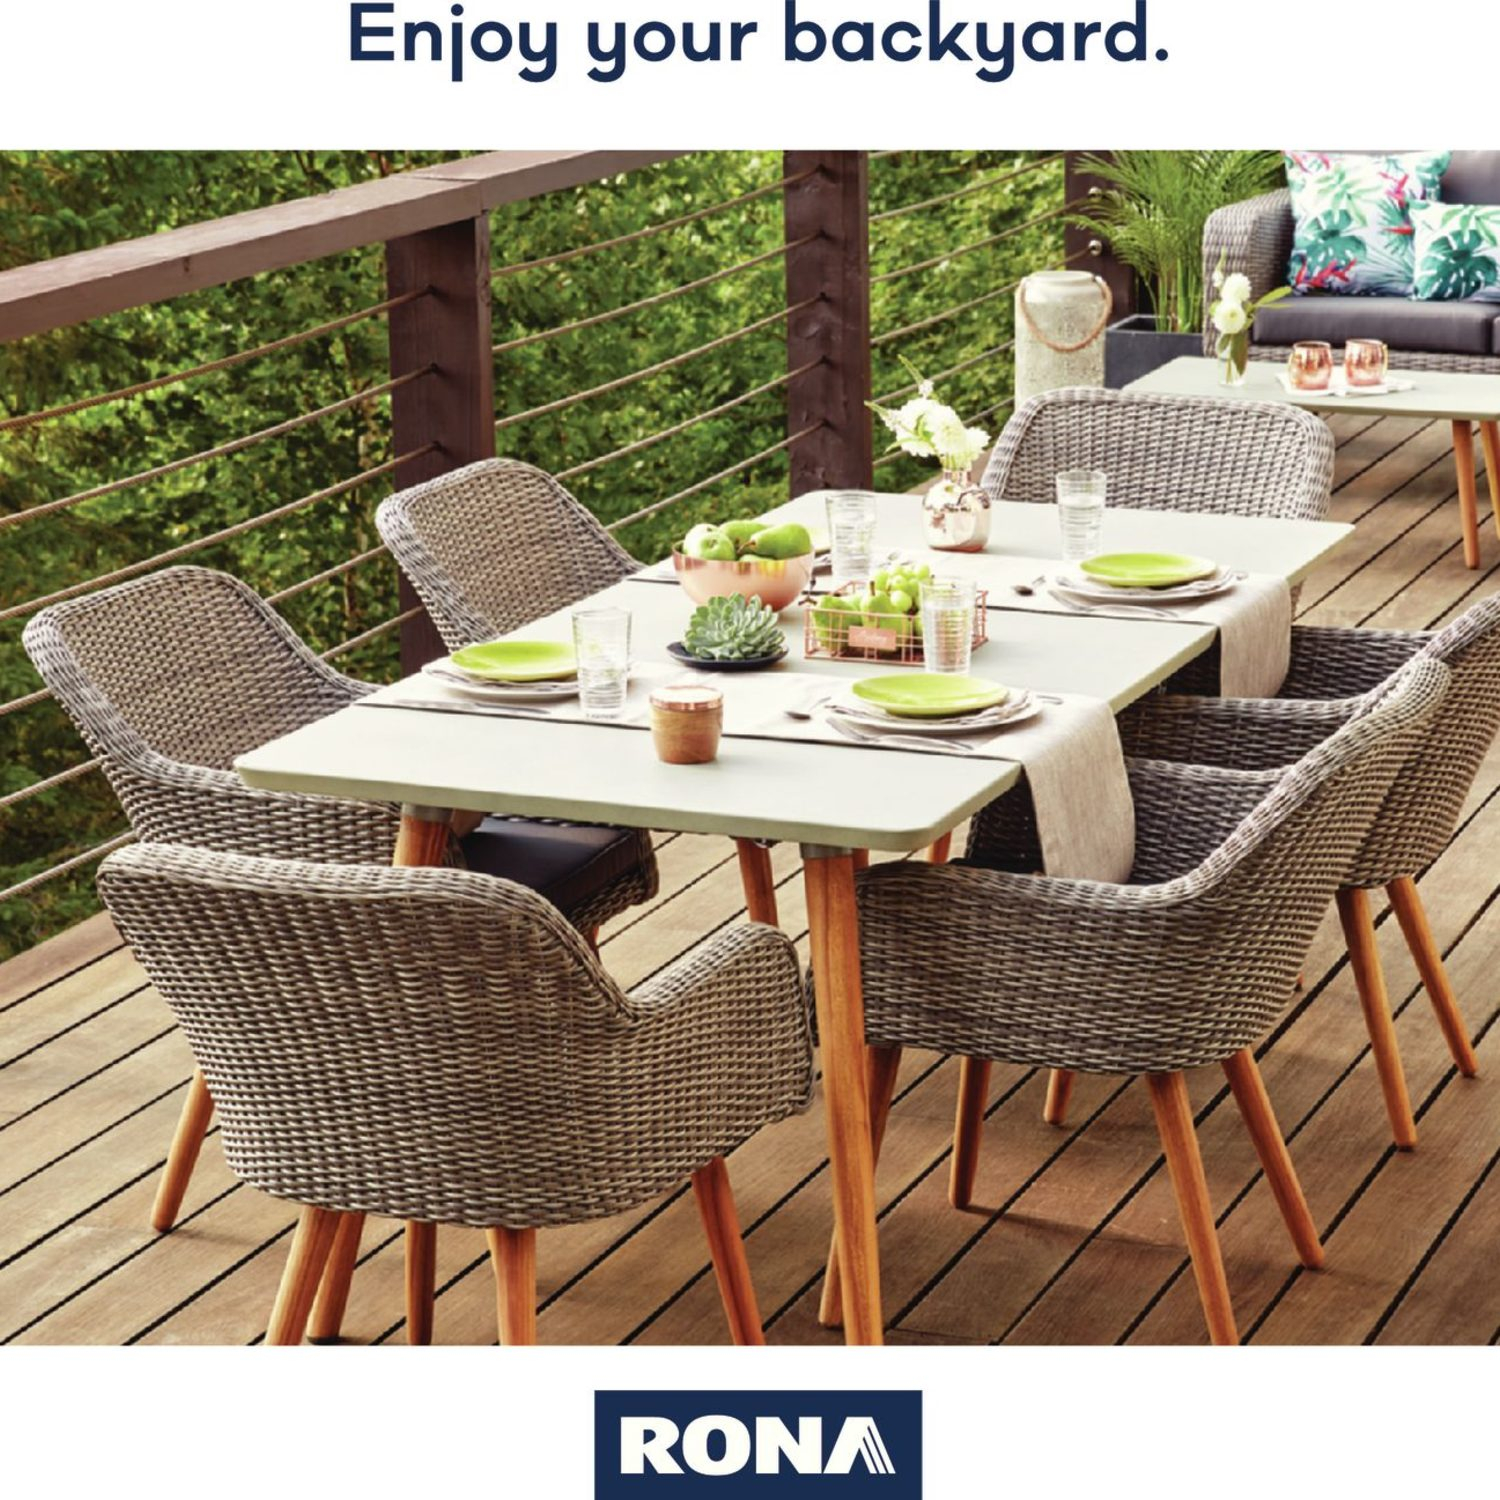 Rona Weekly Flyer Enjoy Your Backyard Mar 22 Apr 25 within proportions 1500 X 1500